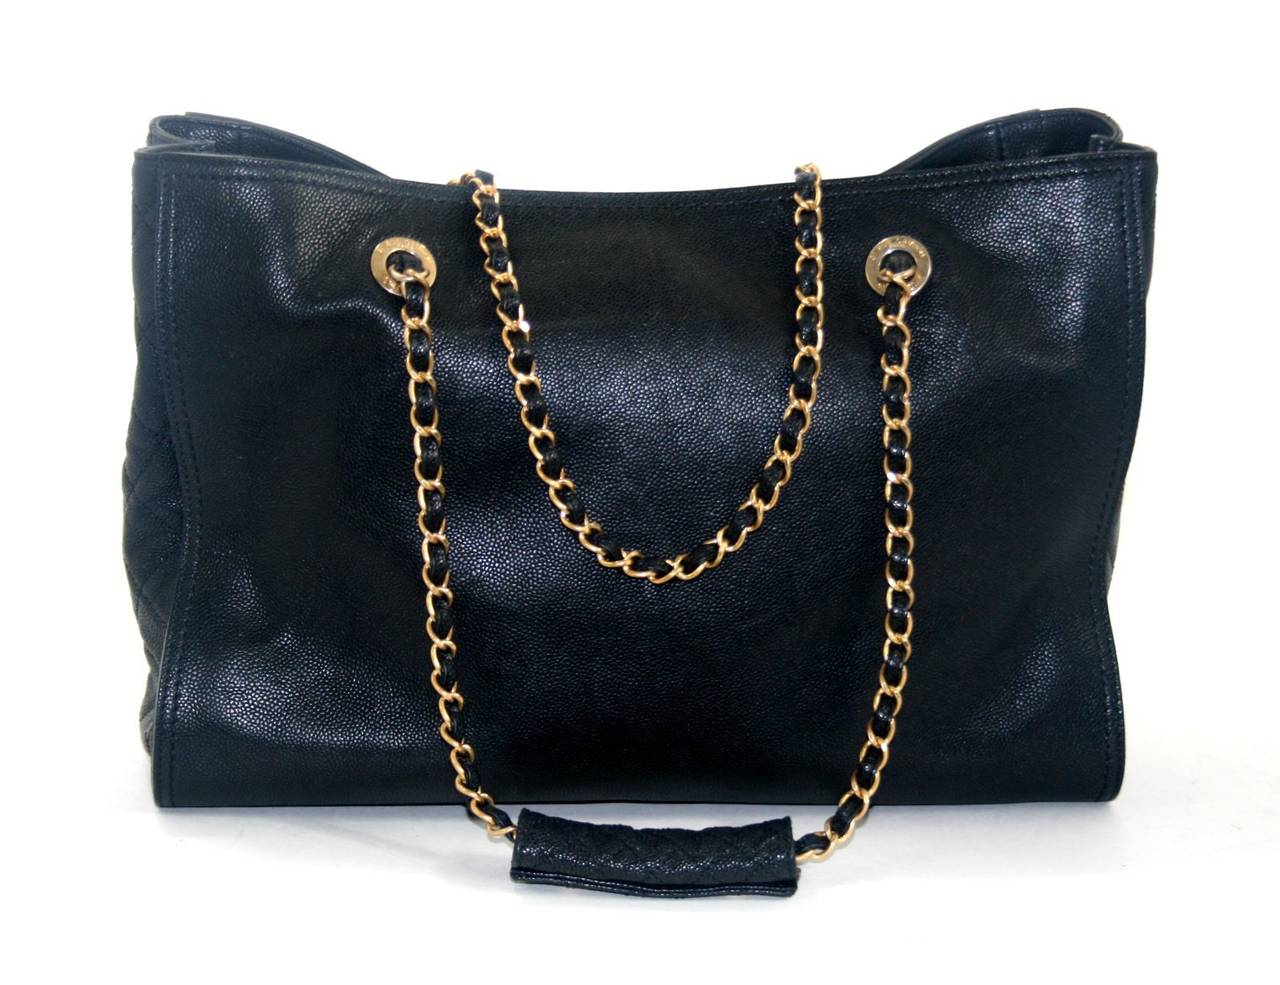 In pristine condition, this Black Calfskin Shopper from Chanel’s spring 2012 collection is a former store display that has never been carried.  The go anywhere piece is beautifully designed with classic Chanel features; it is simply a smart